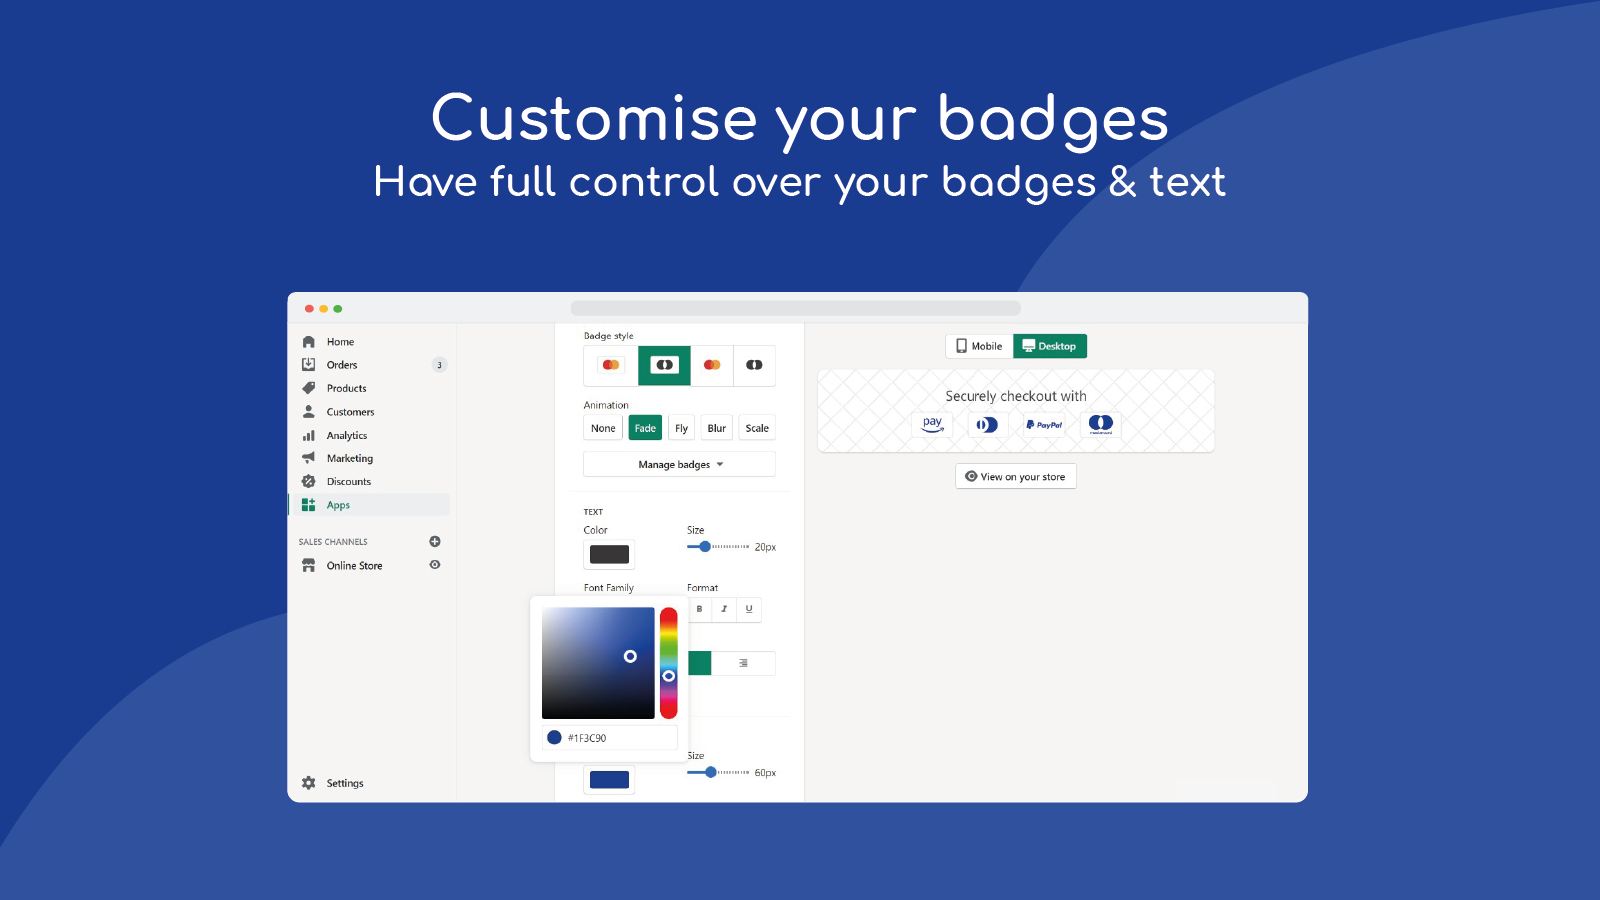 have full control over your badges & text